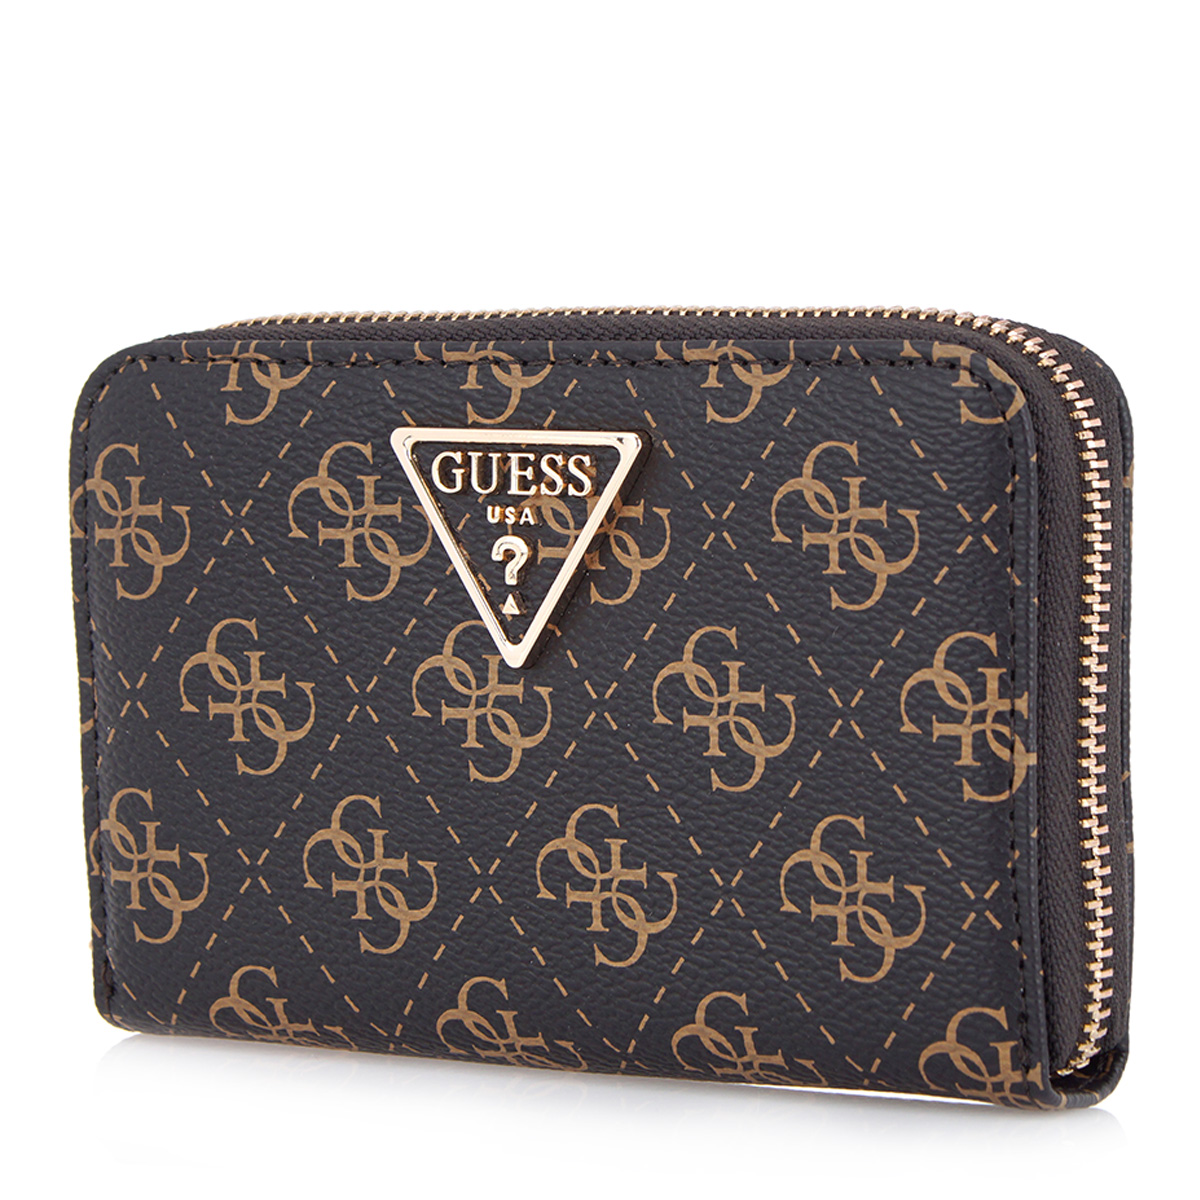 GUESS wallets new - 2